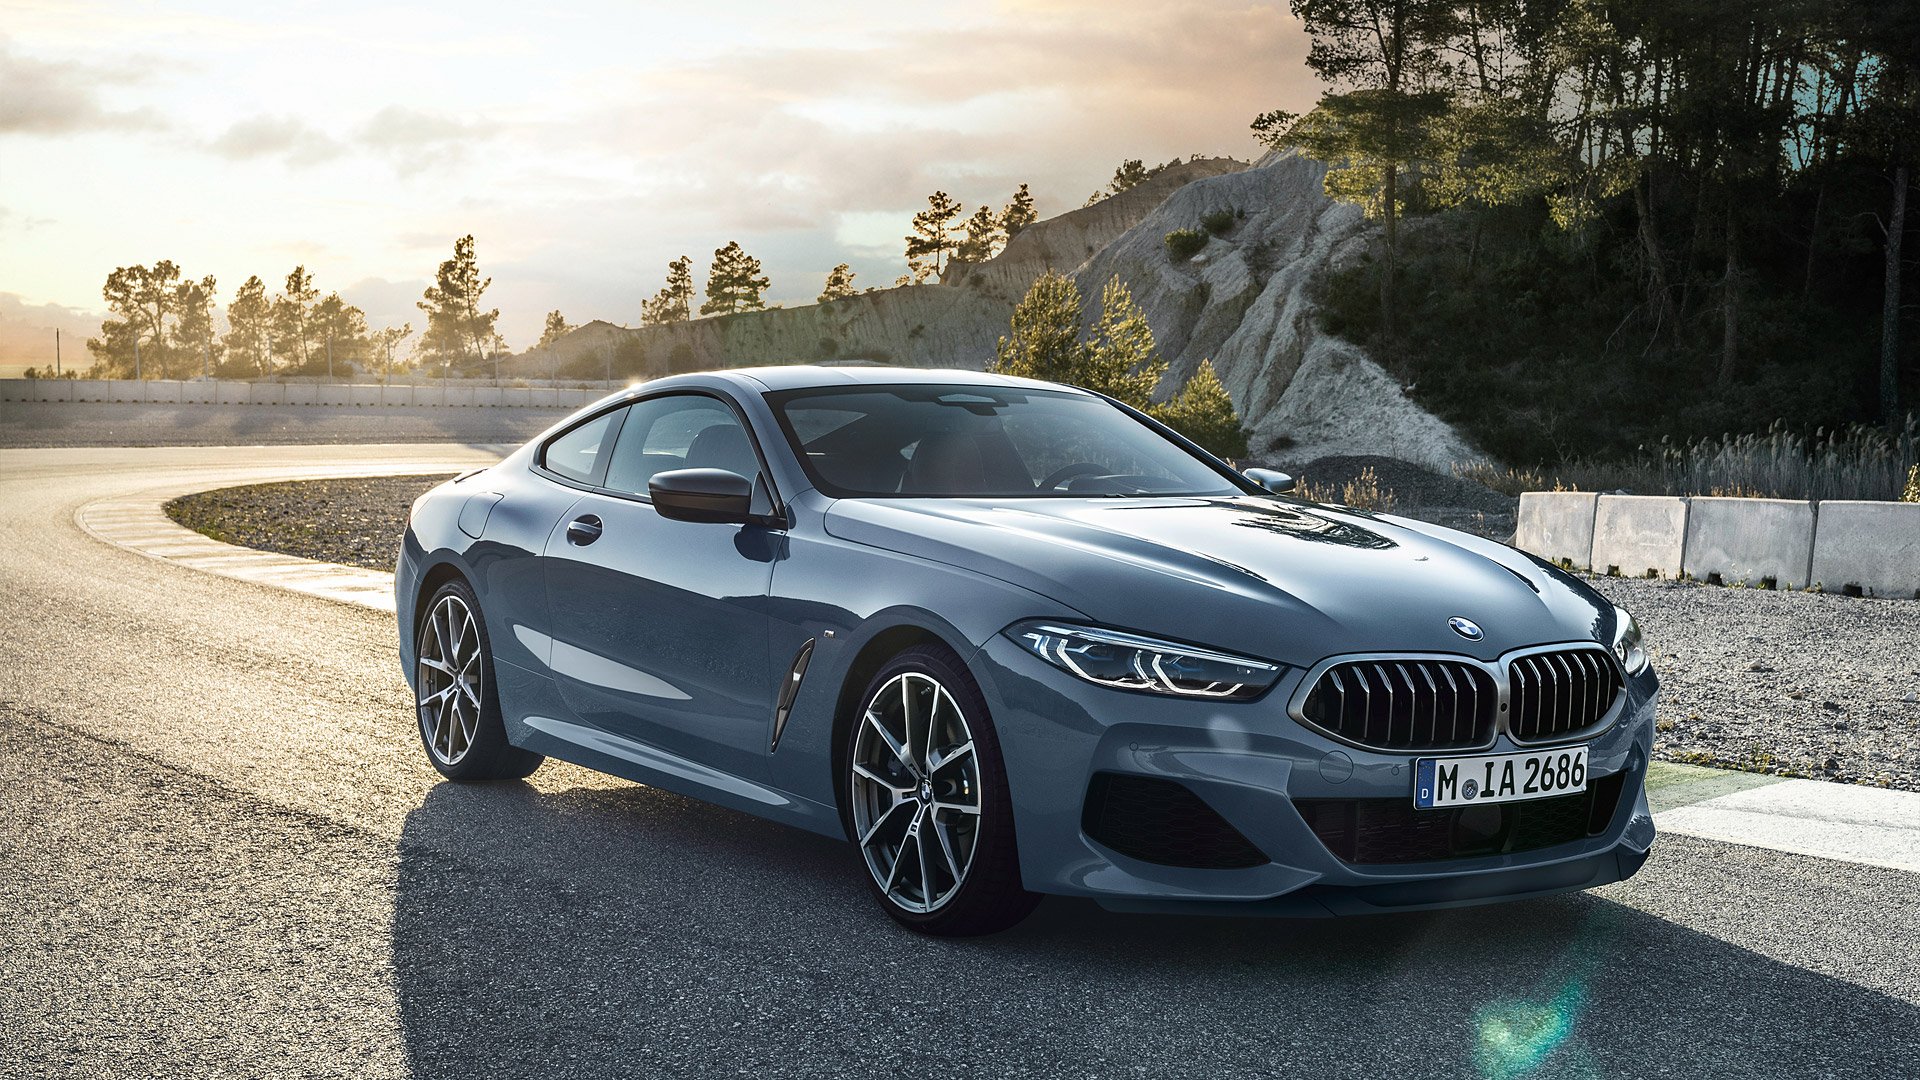 2019 BMW 8 Series Coupe Wallpapers HD Images   WSupercars 1920x1080